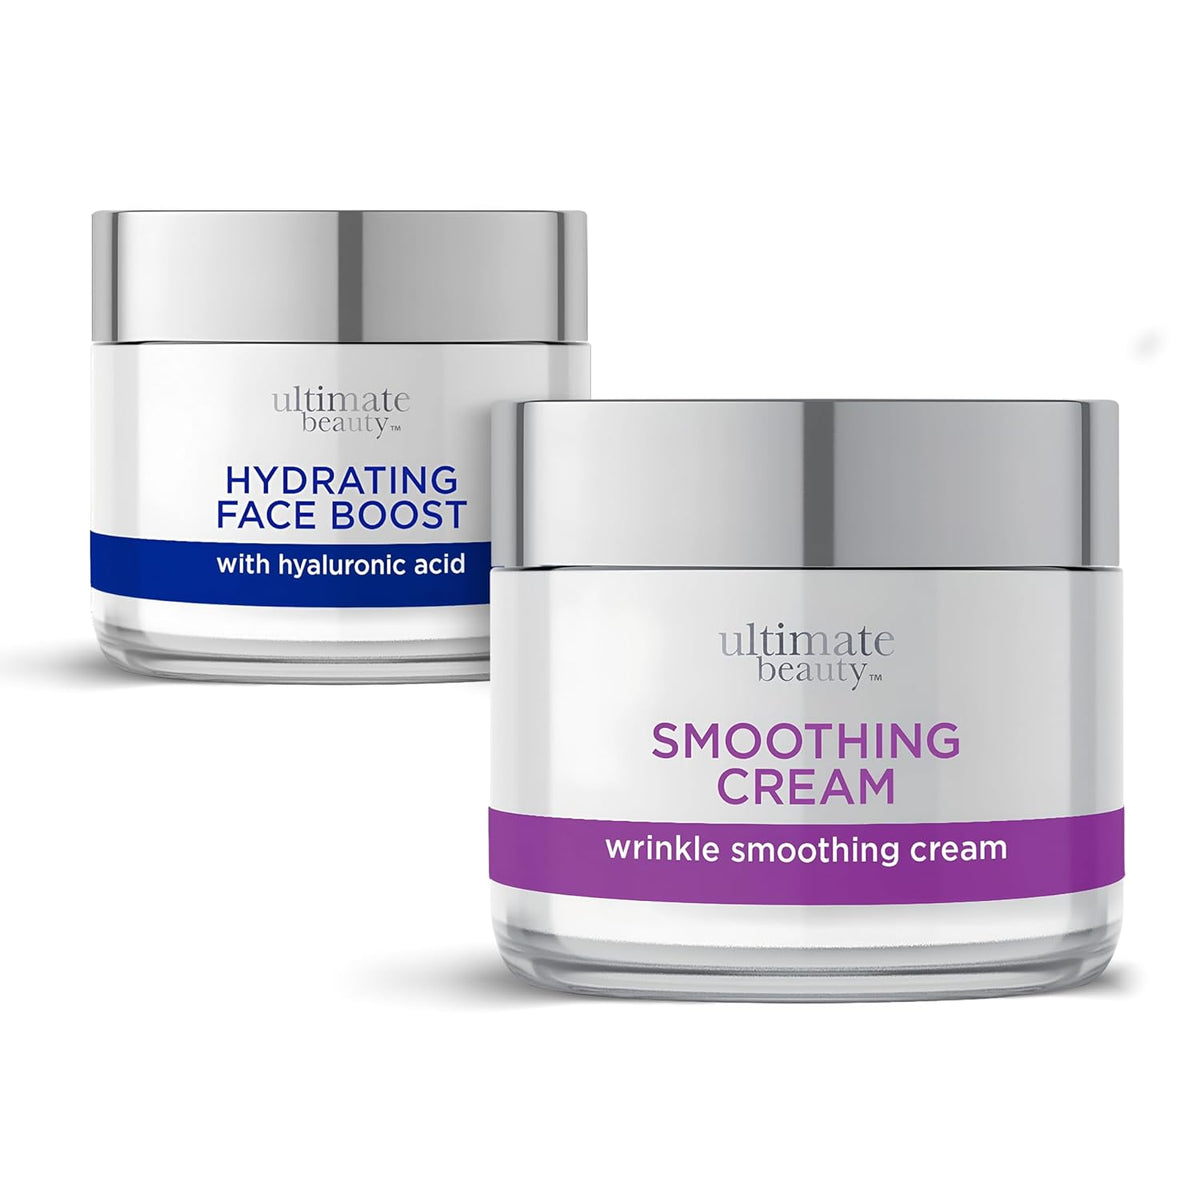 Smoothing Anti-Aging & Hydrating Face Boost Bundle